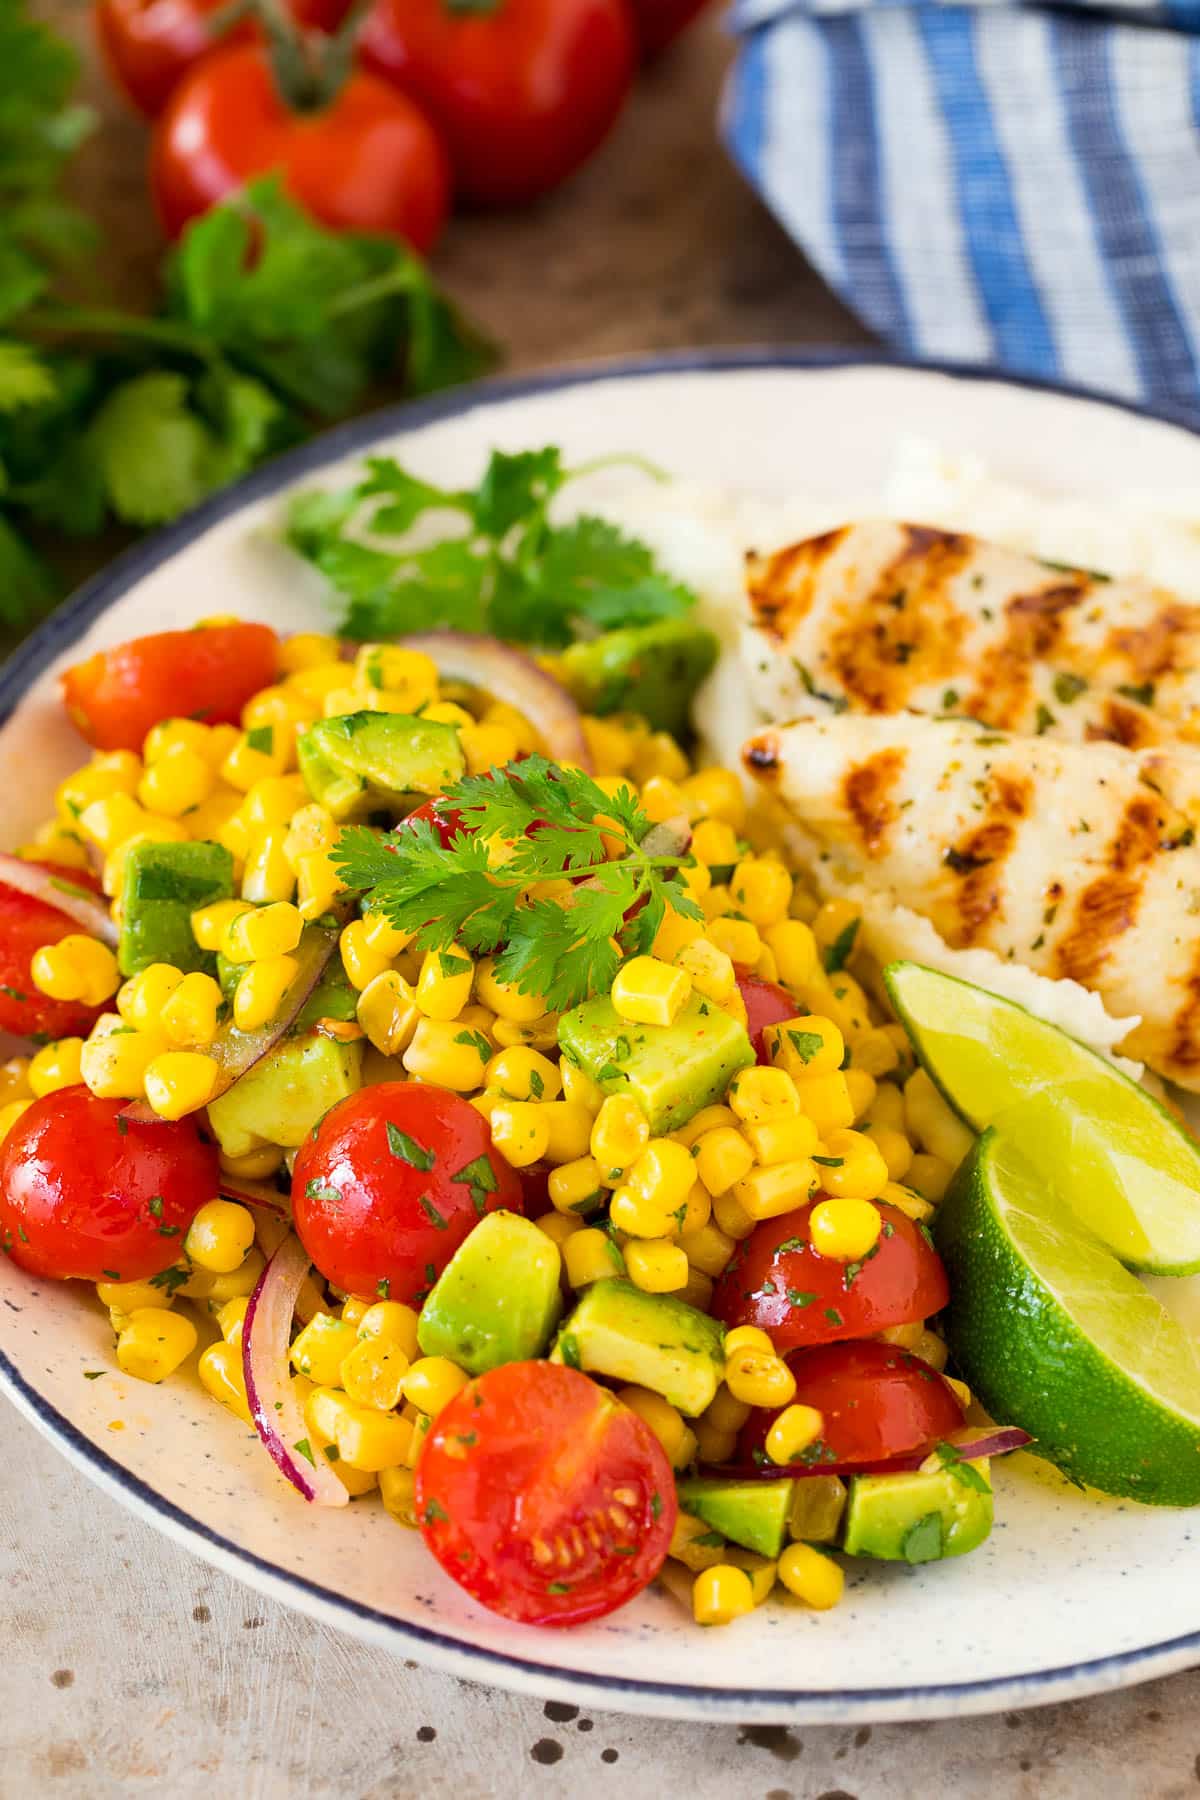 Avocado corn salad on a plate with grilled chicken.